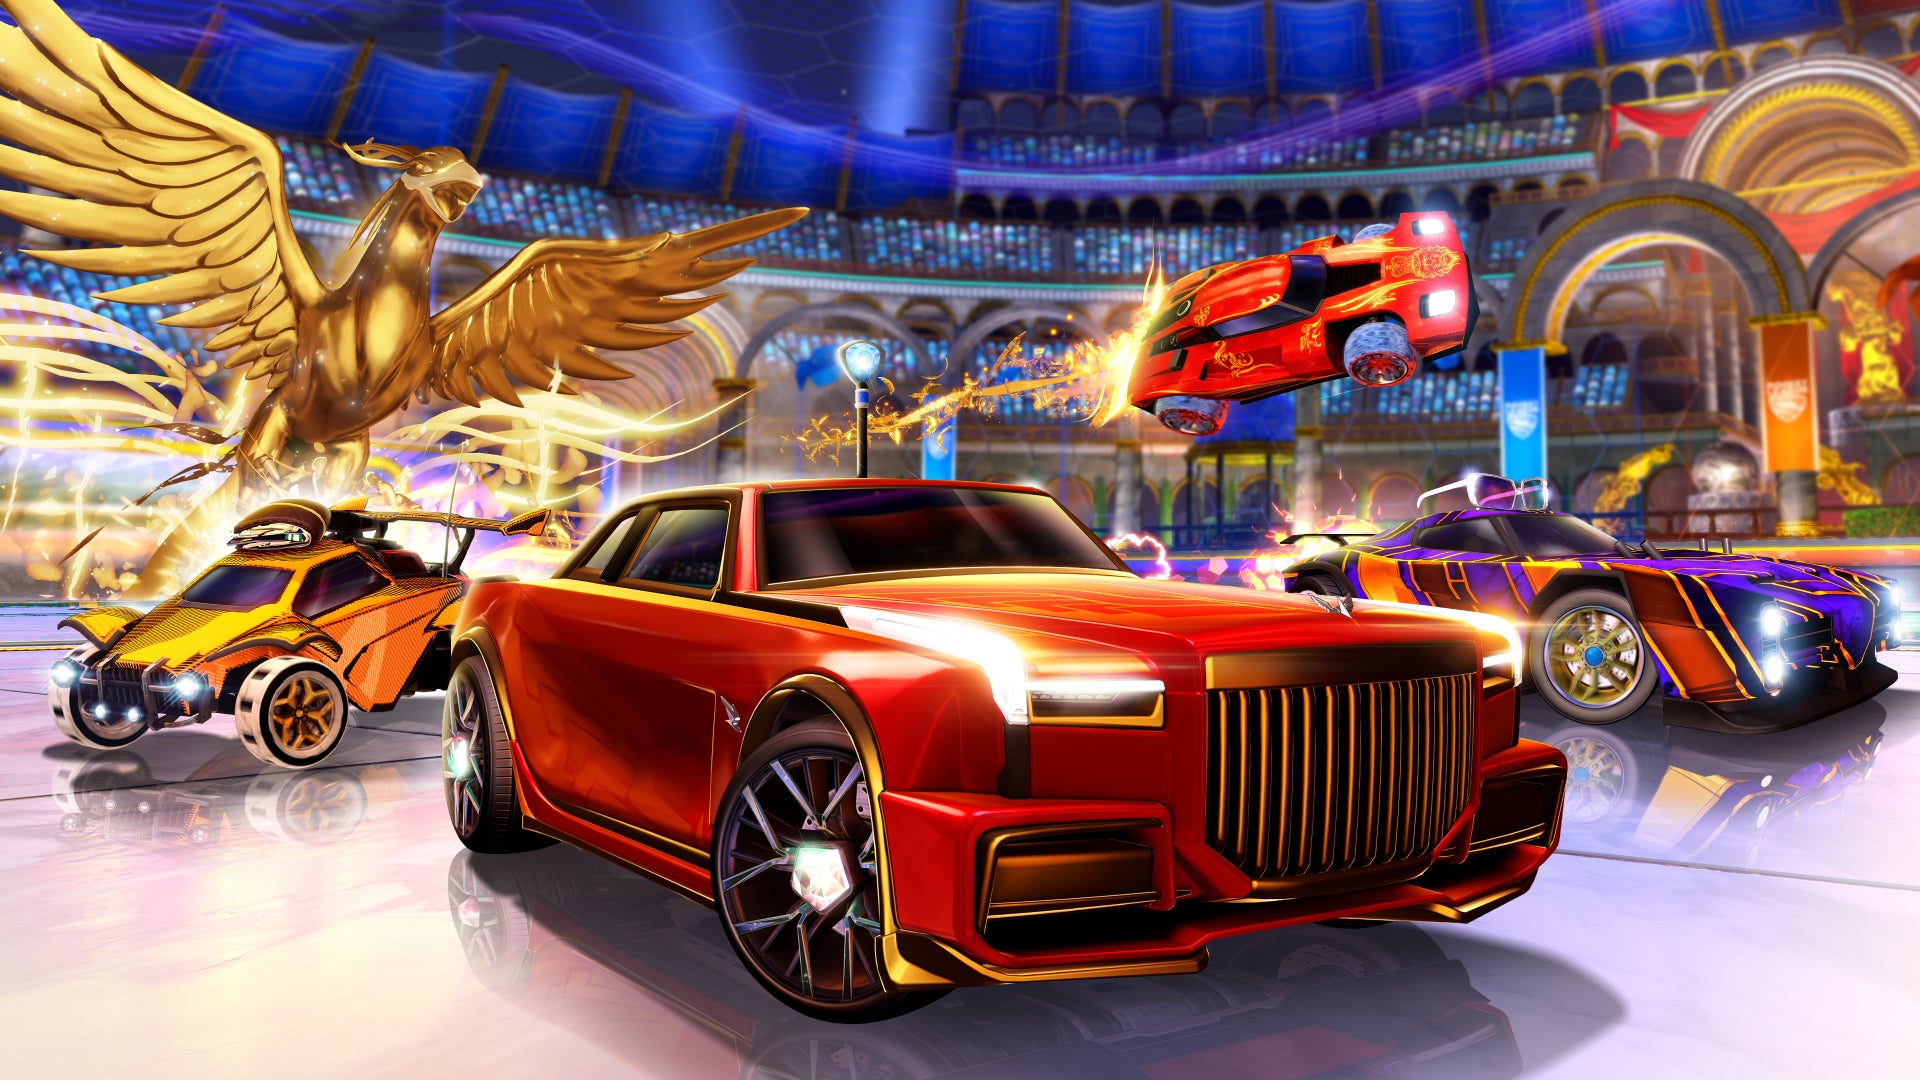 Rocket League Sideswipe Season 7 Out Now, Major Rocket Pass Changes and New Content Included